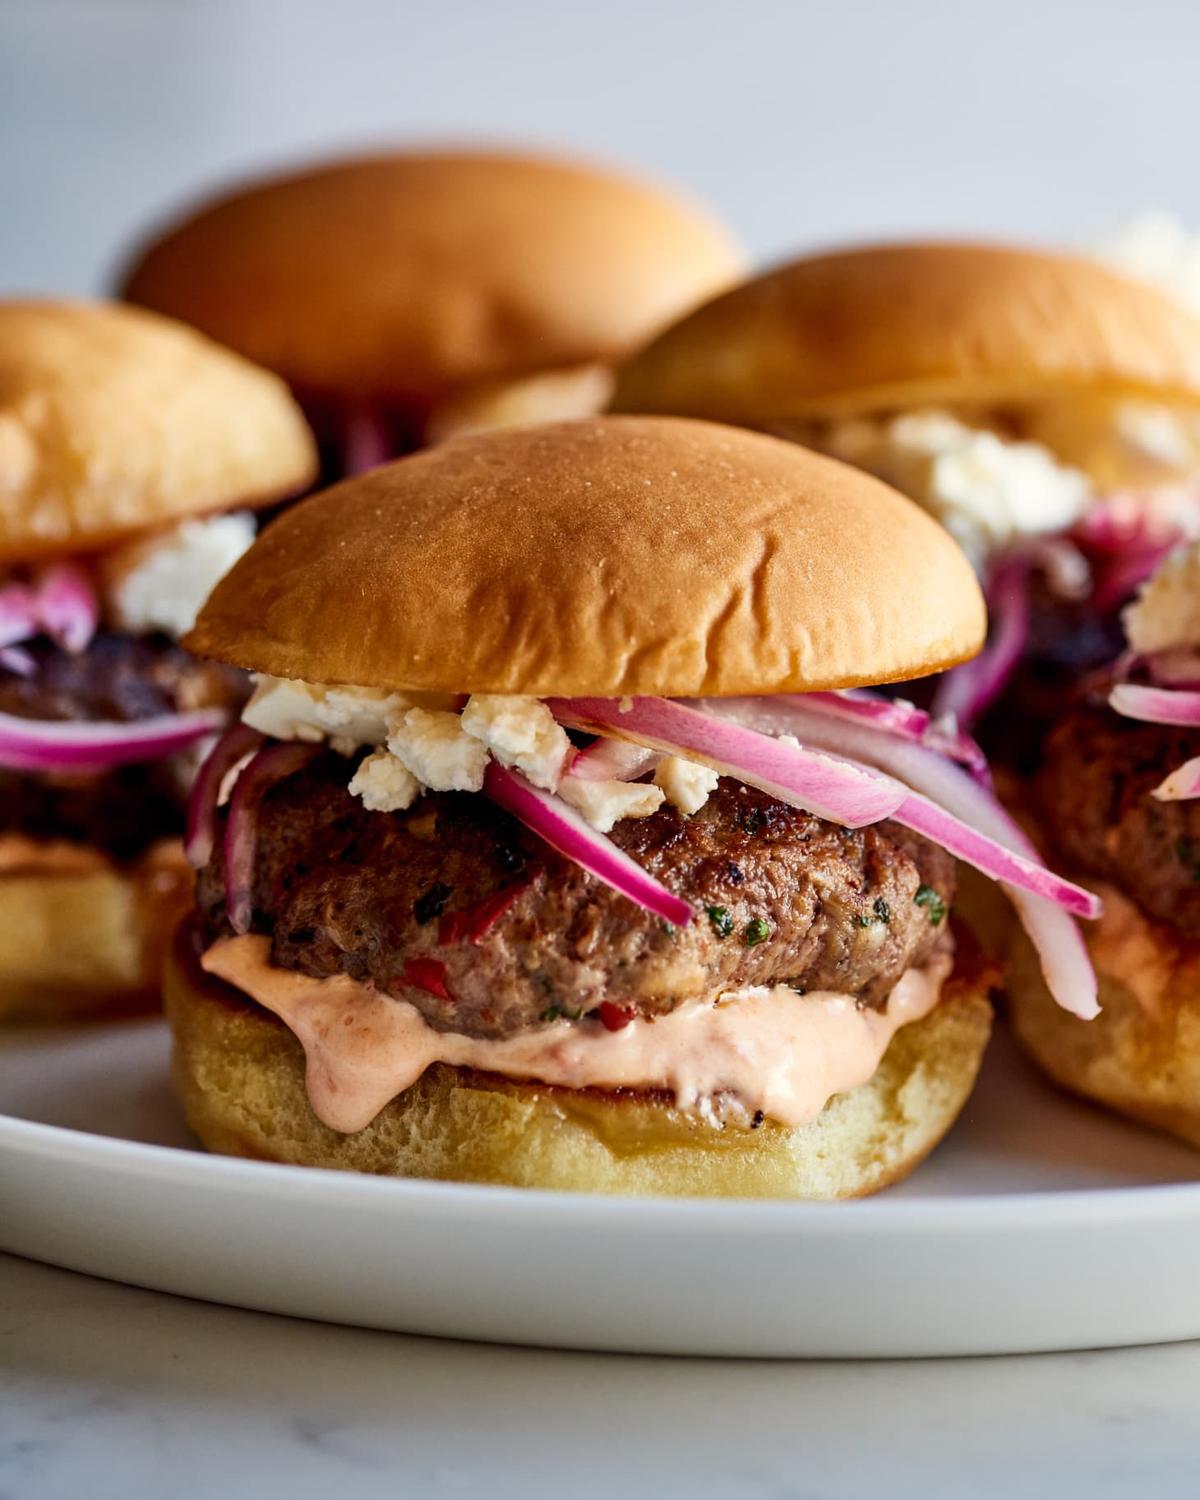 Harissa and lamb make for a dynamic duo in these sliders topped with feta cheese, pickled onions and harissa mayo. (Joe Lingeman/TNS)